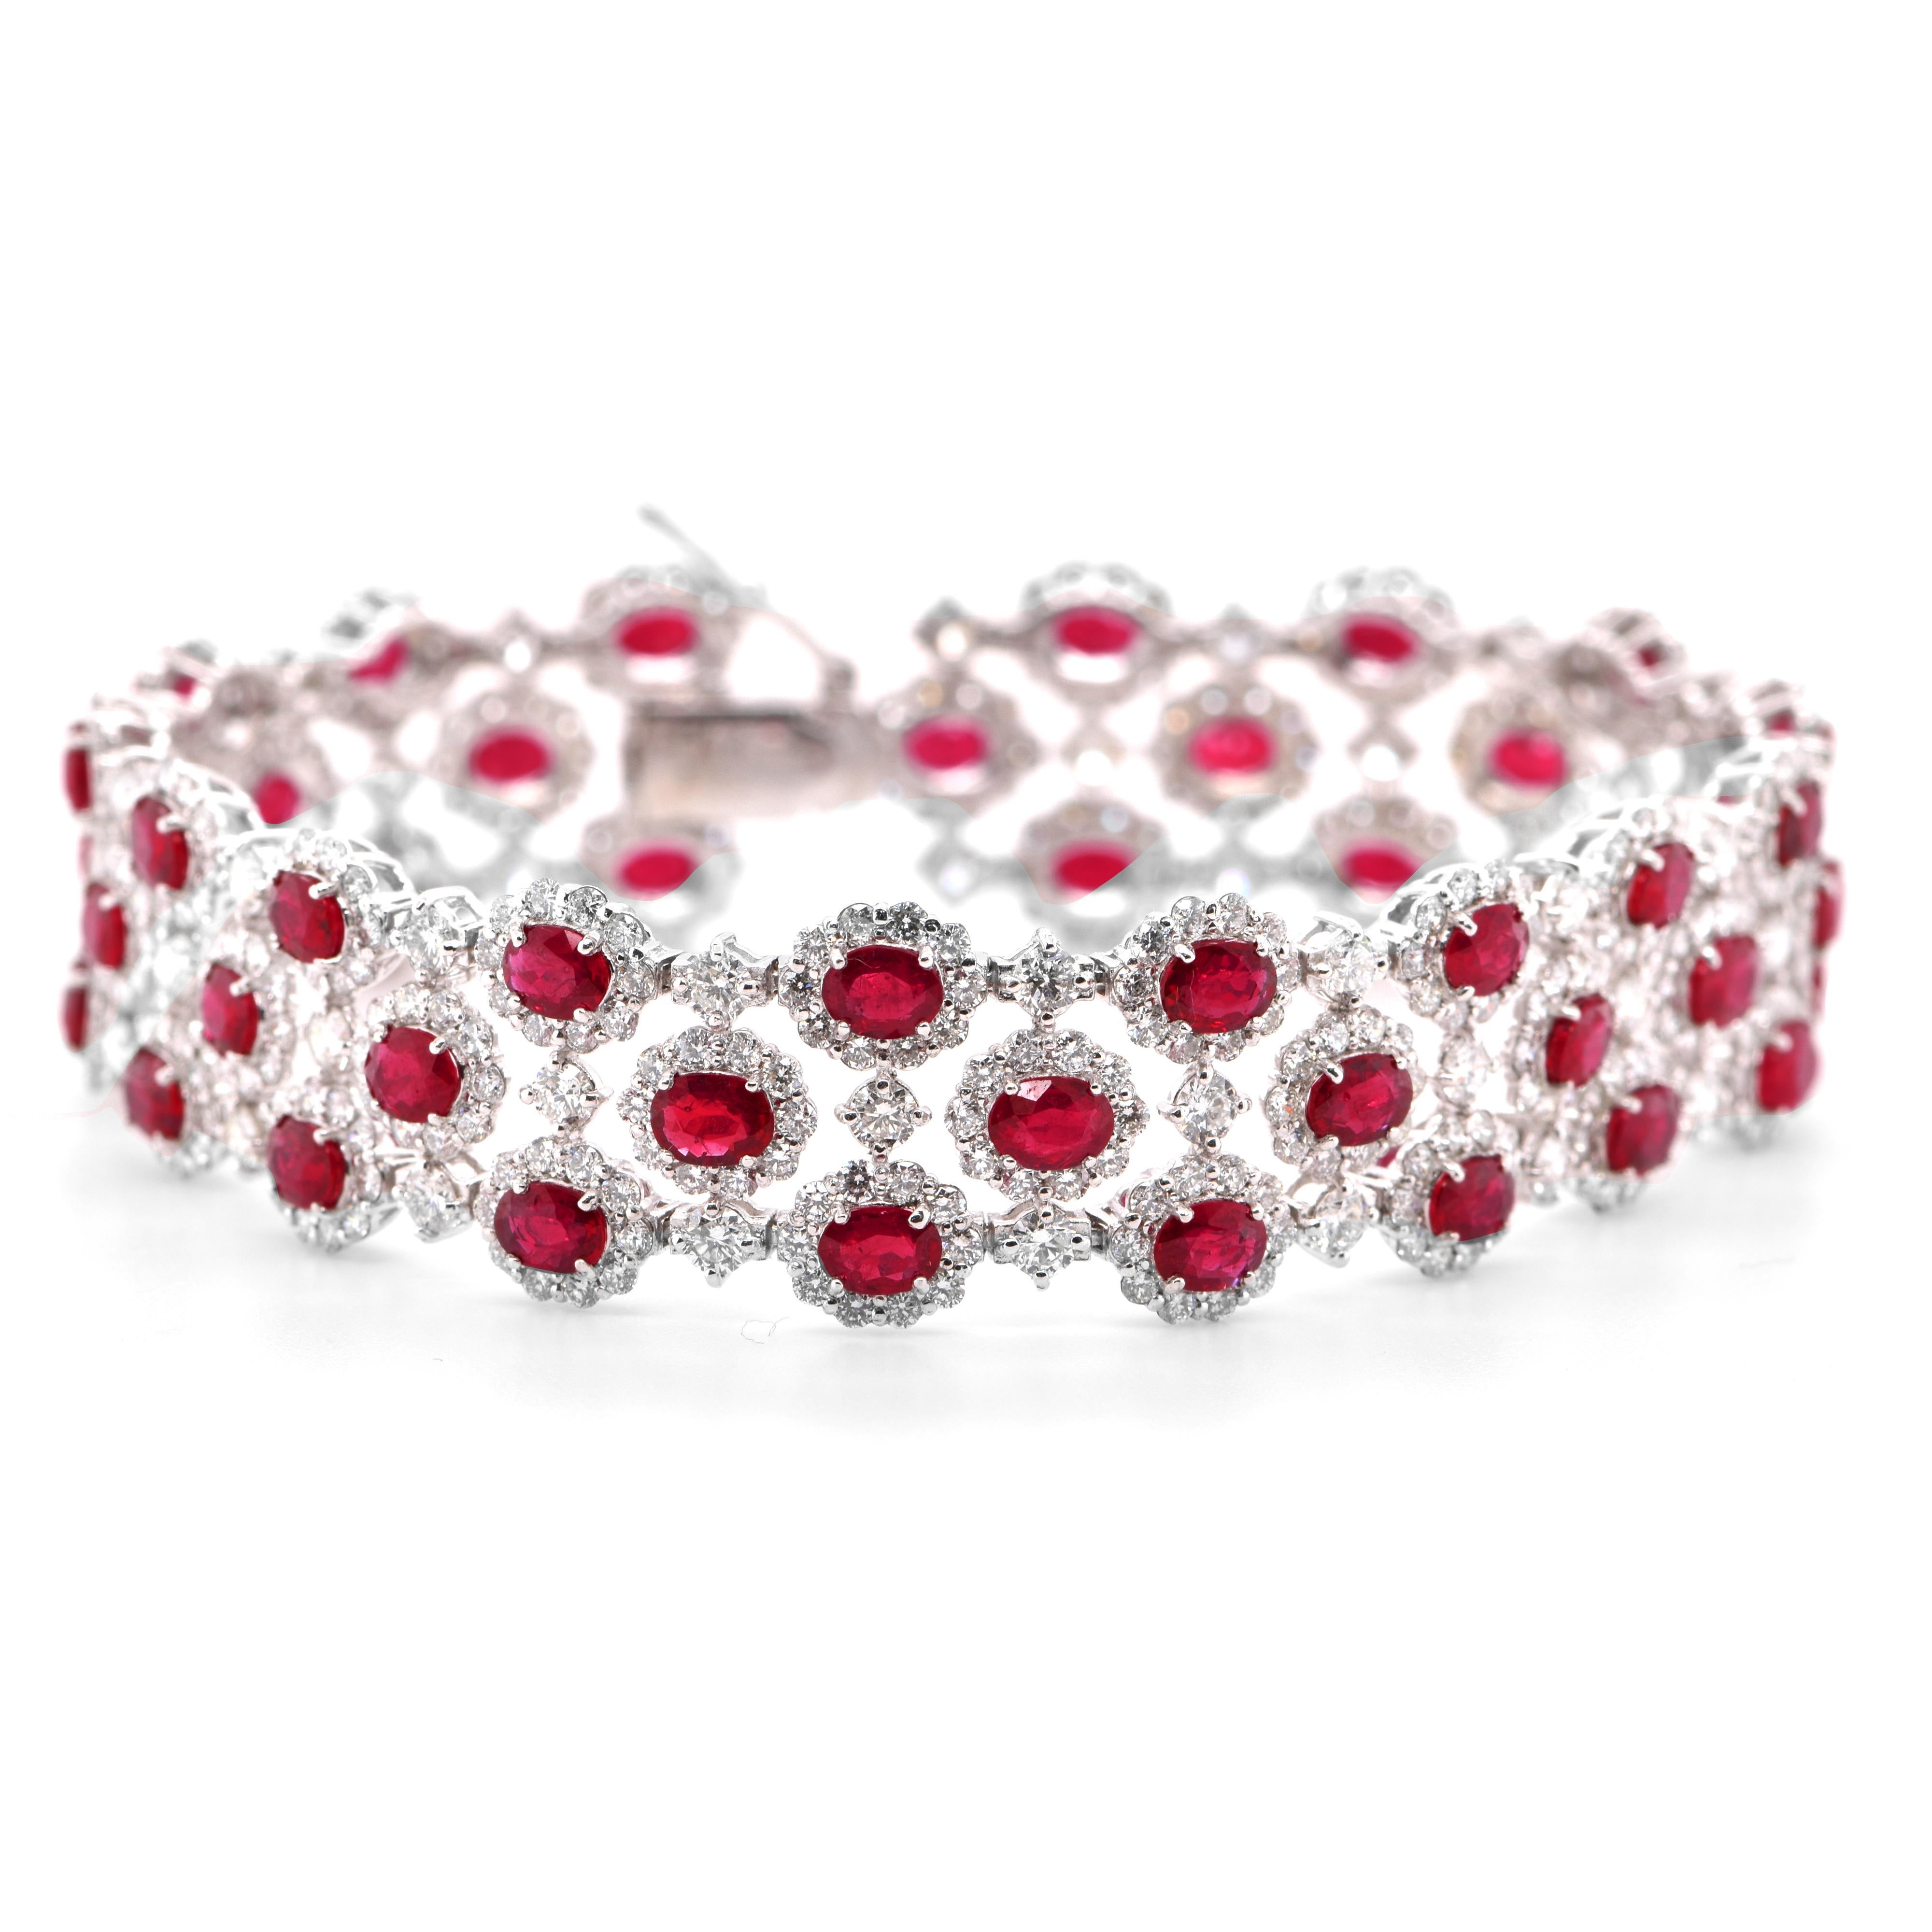 A beautiful 3 Line Bracelet featuring a total of 9.41 Carats of Natural Rubies and 7.91 Carats of Diamond Accents set in Platinum. The Rubies are of 6x4 mm size. Rubies are referred to as 